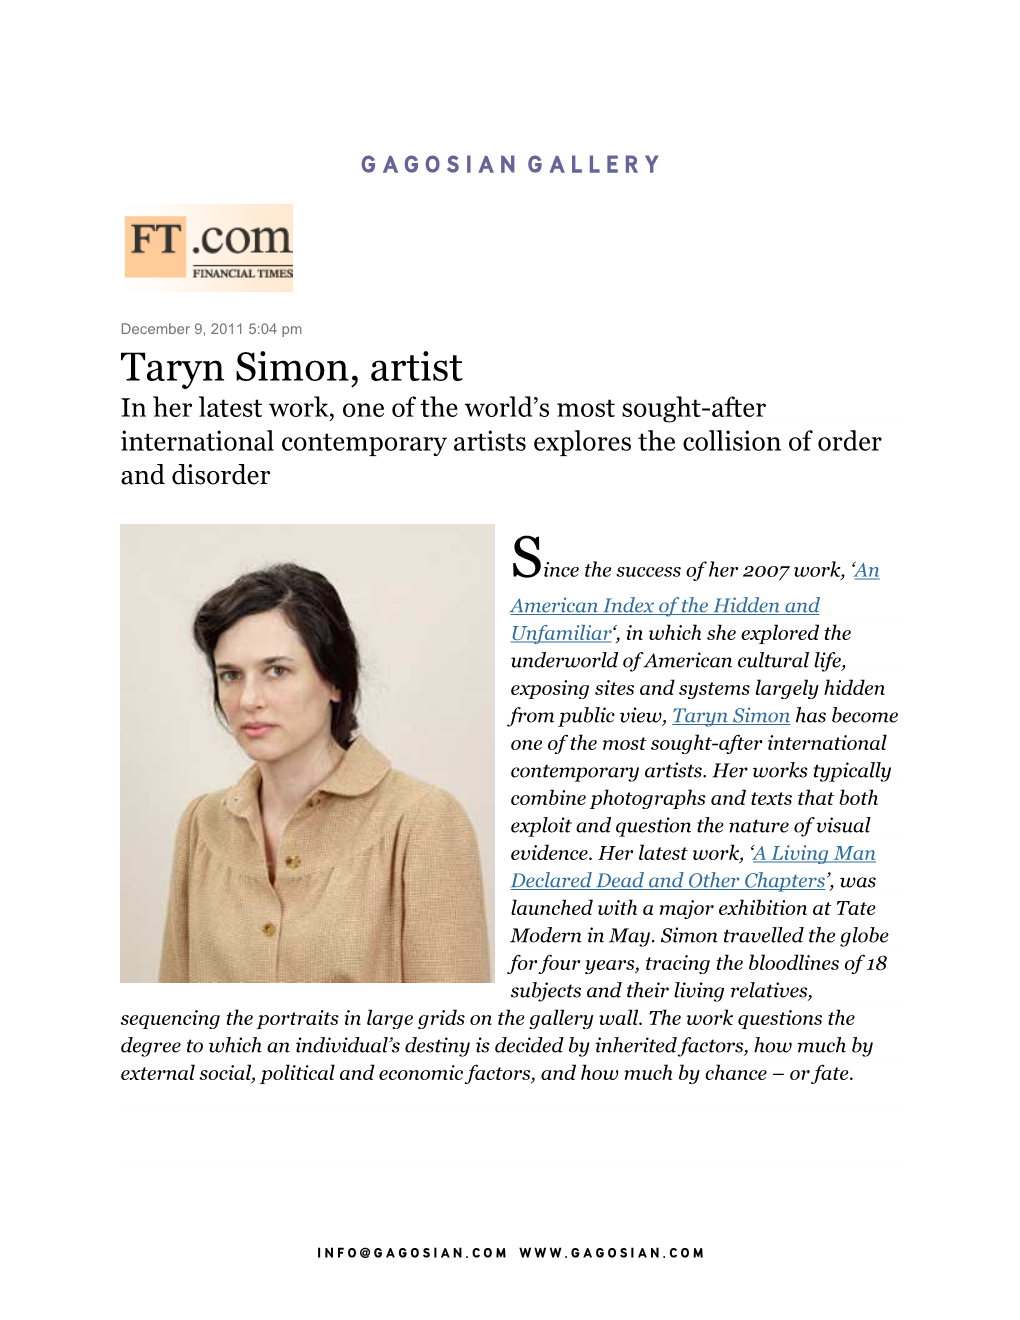 Taryn Simon, Artist in Her Latest Work, One of the World’S Most Sought-After International Contemporary Artists Explores the Collision of Order and Disorder